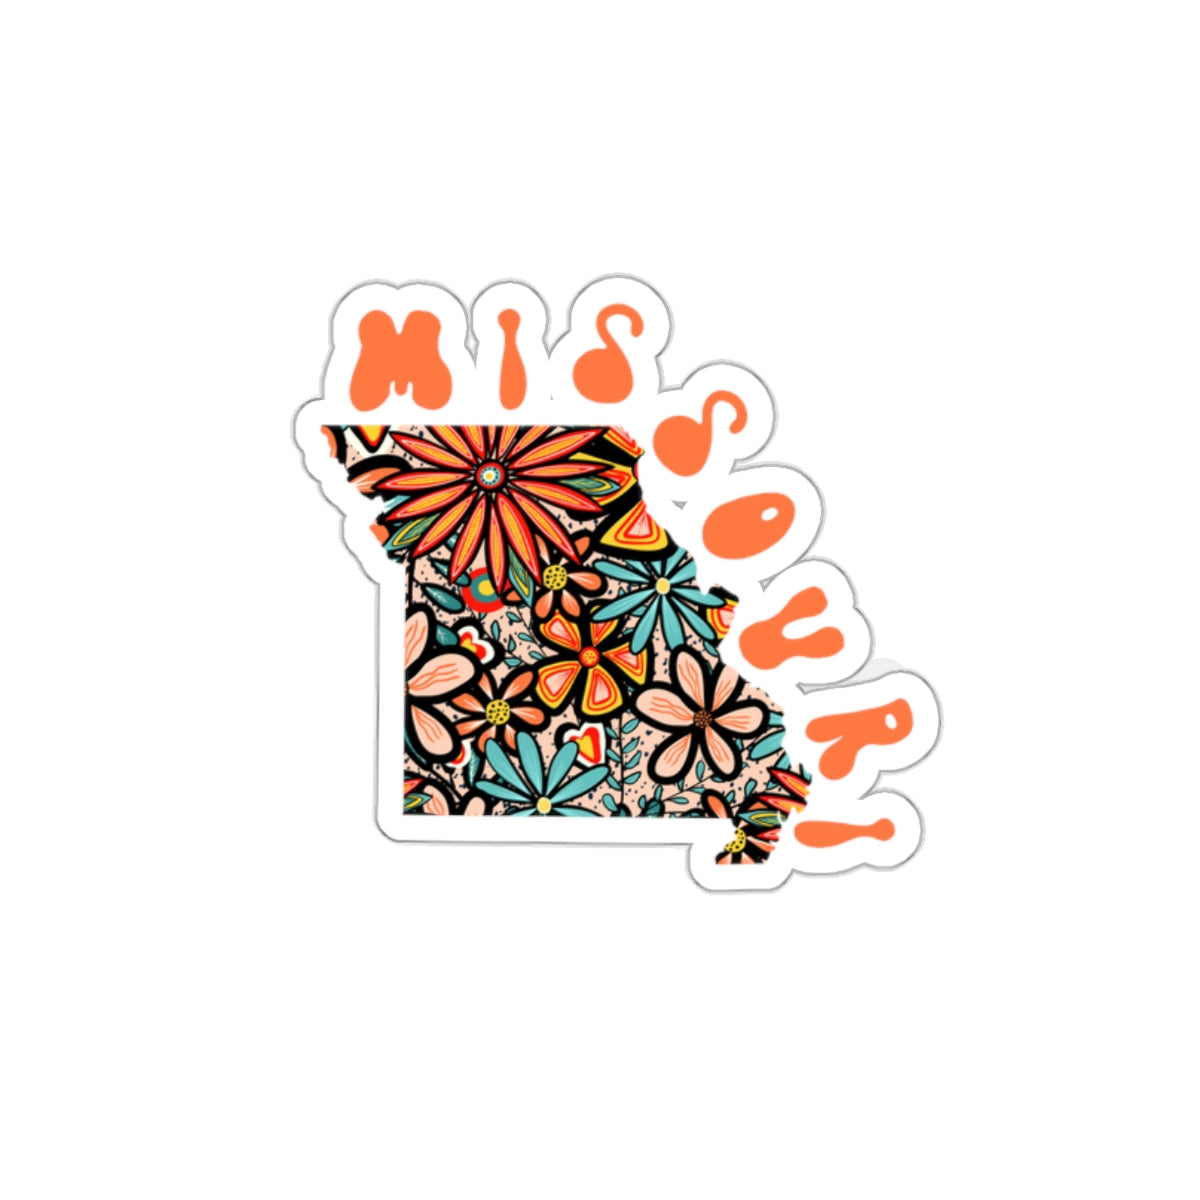 Missouri State Sticker | Vinyl Artist Designed Illustration Featuring Missouri State Outline Filled With Retro Flowers with Retro Hand-Lettering